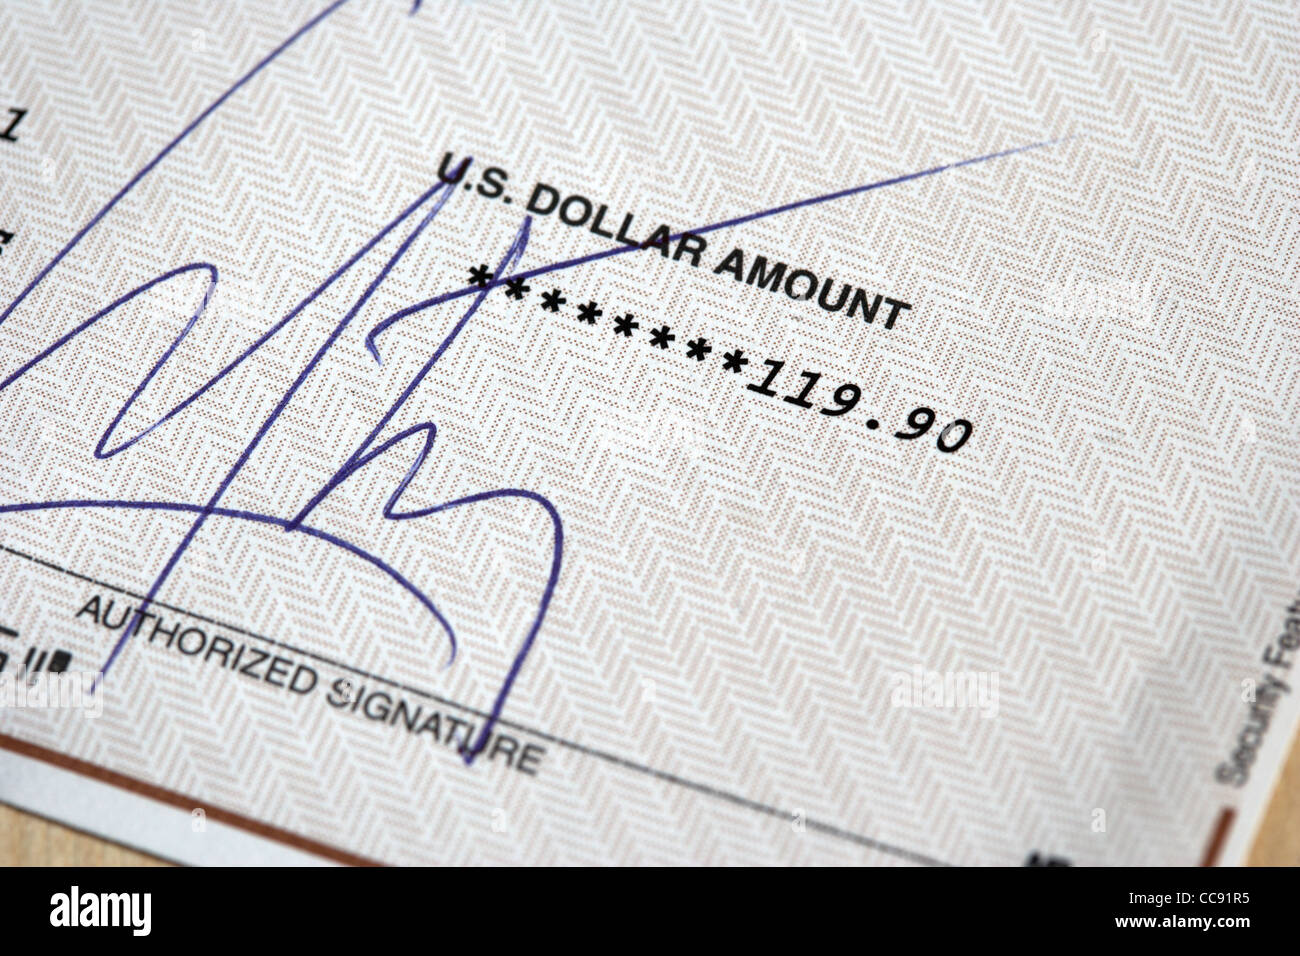 us dollar cheque issued as payment with dollar amount and signature Stock Photo